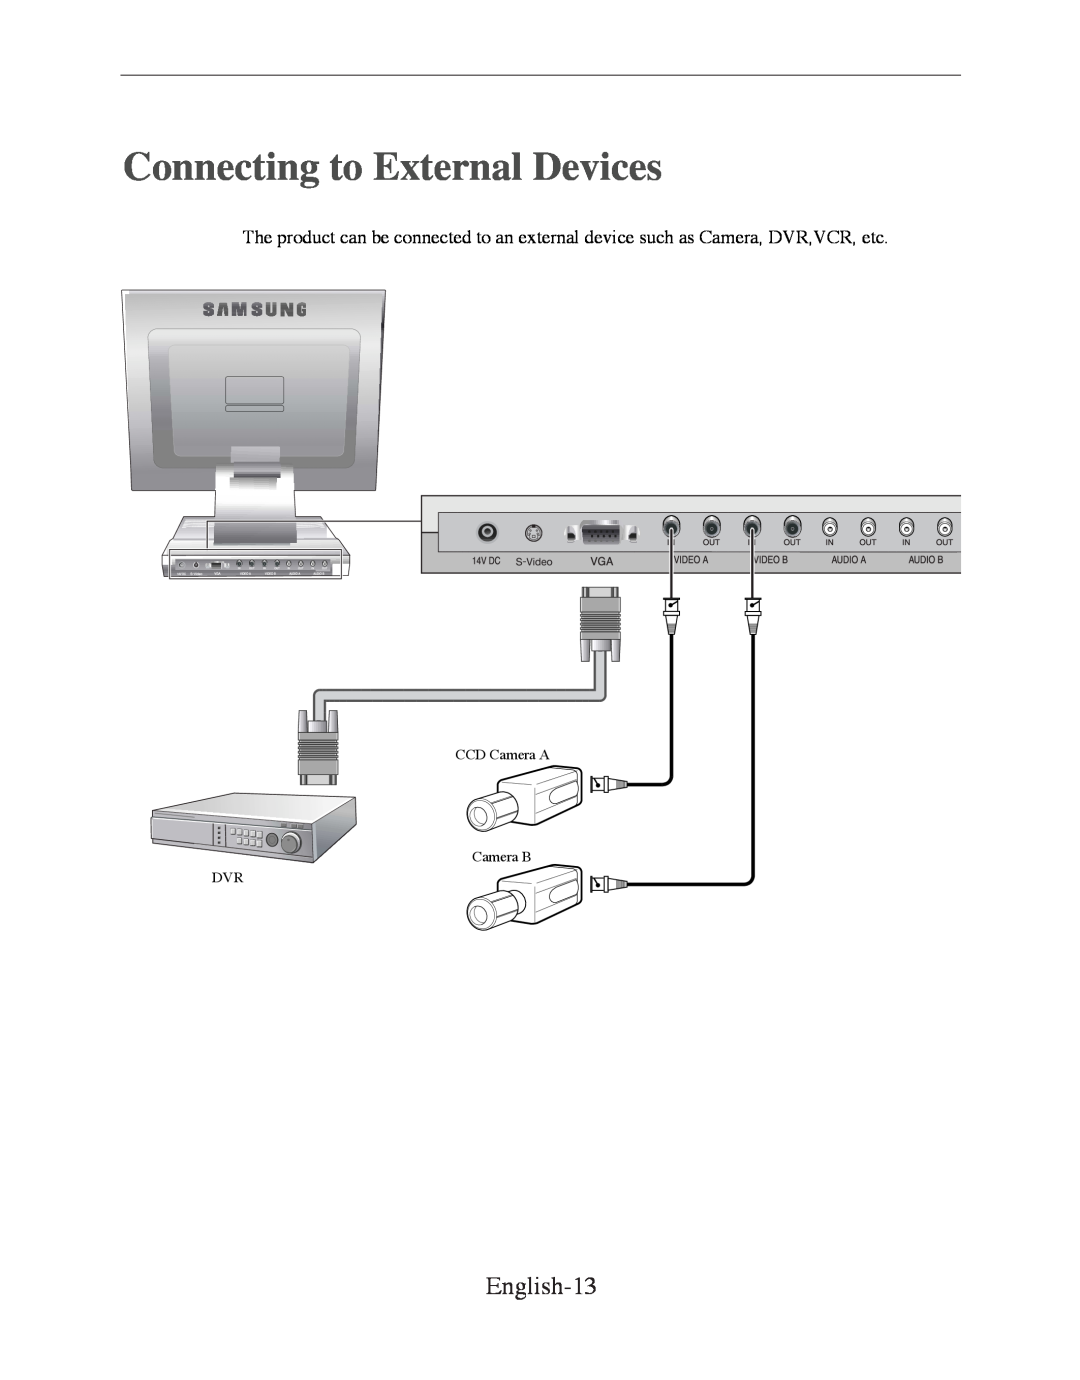 Samsung SMT-170P manual Connecting to External Devices, English-13, CCD Camera A Camera B DVR 